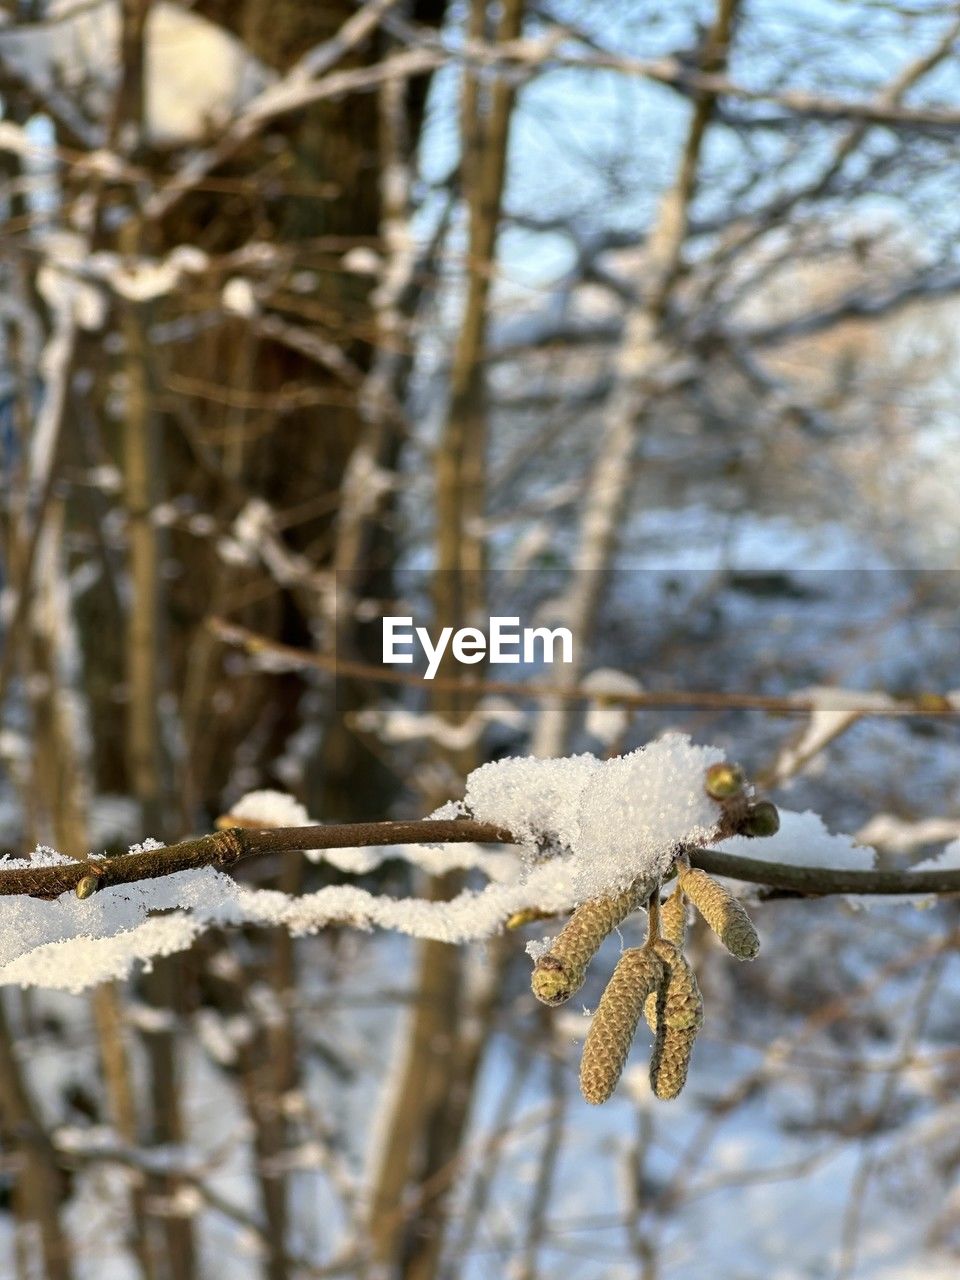 winter, branch, tree, nature, focus on foreground, frost, snow, cold temperature, spring, plant, leaf, no people, day, wildlife, twig, autumn, close-up, ice, outdoors, frozen, beauty in nature, animal, freezing, animal wildlife, animal themes, land, one animal